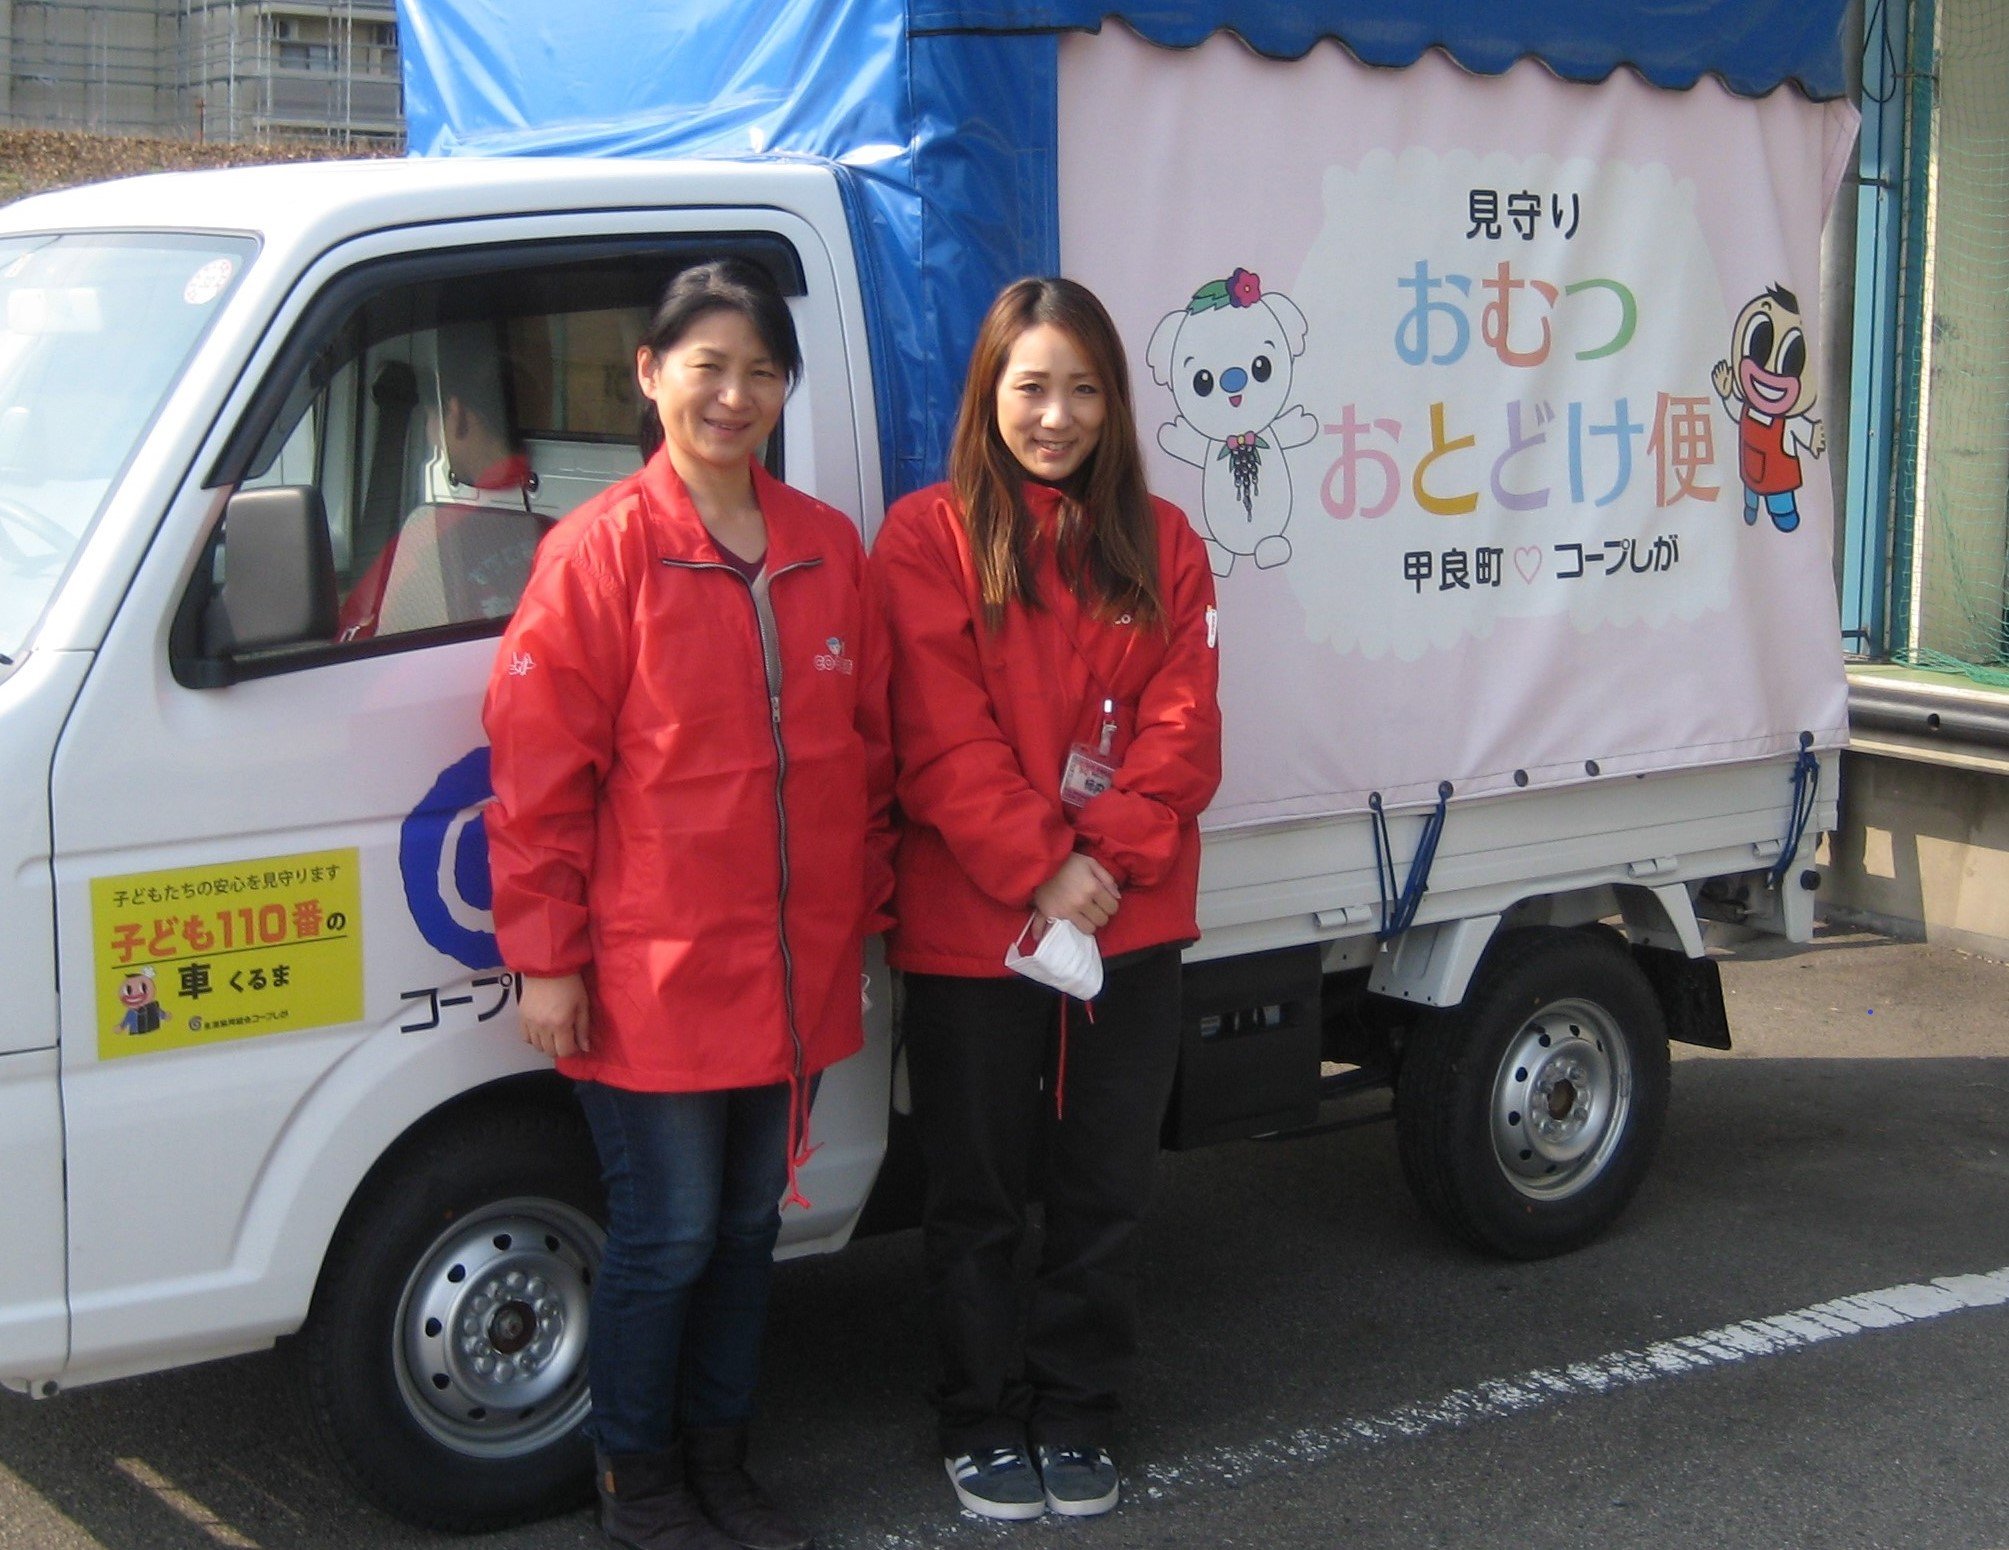 Co-op Shiga takes over child-rearing support services of local government